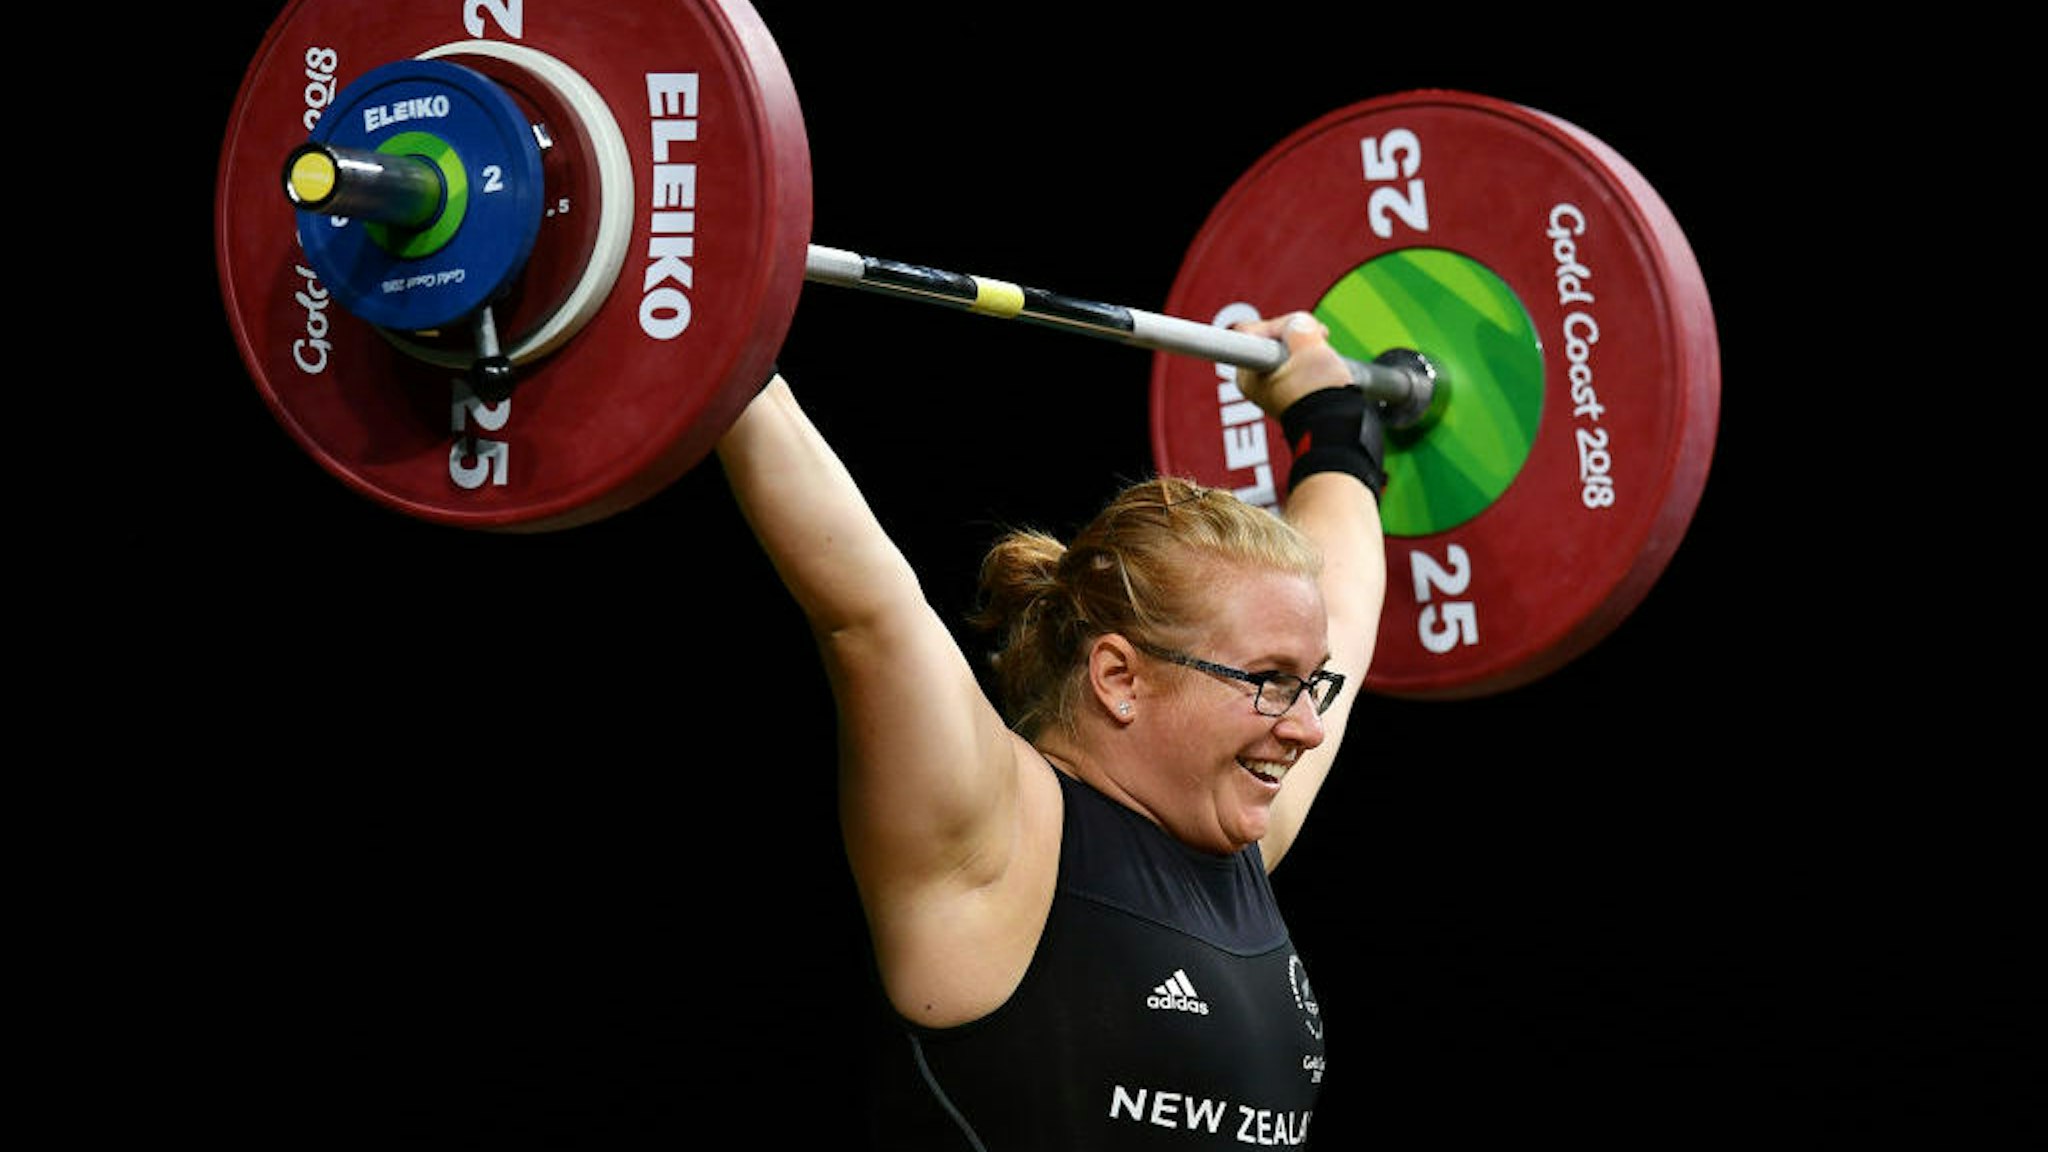 GOLD COAST, AUSTRALIA - APRIL 09: Tracey Lambrechs of New Zealand competes in the Women's 90kg Final during the Weightlifting on day five of the Gold Coast 2018 Commonwealth Games at Carrara Sports and Leisure Centre on April 9, 2018 on the Gold Coast, Australia. (Photo by Dan Mullan/Getty Images)